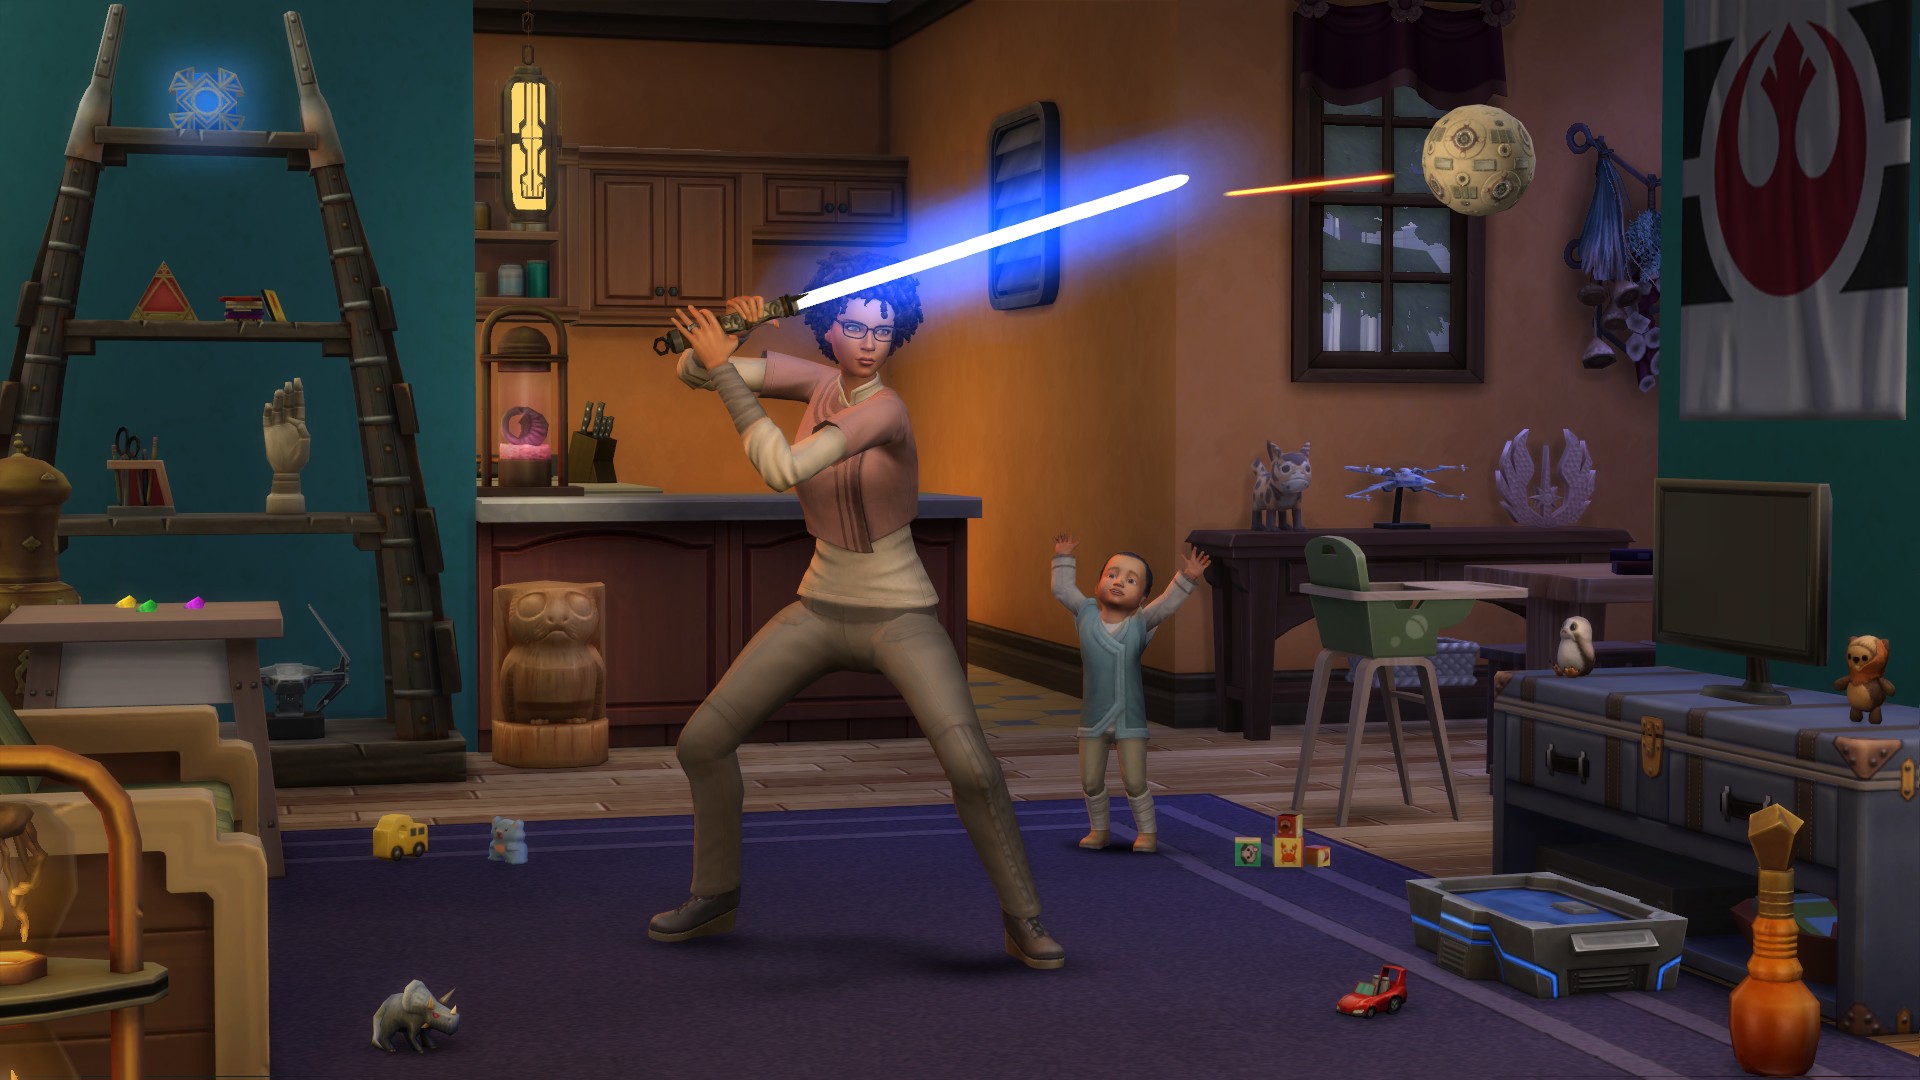 The Sims 4 Star Wars: Journey to Batuu Game Pack